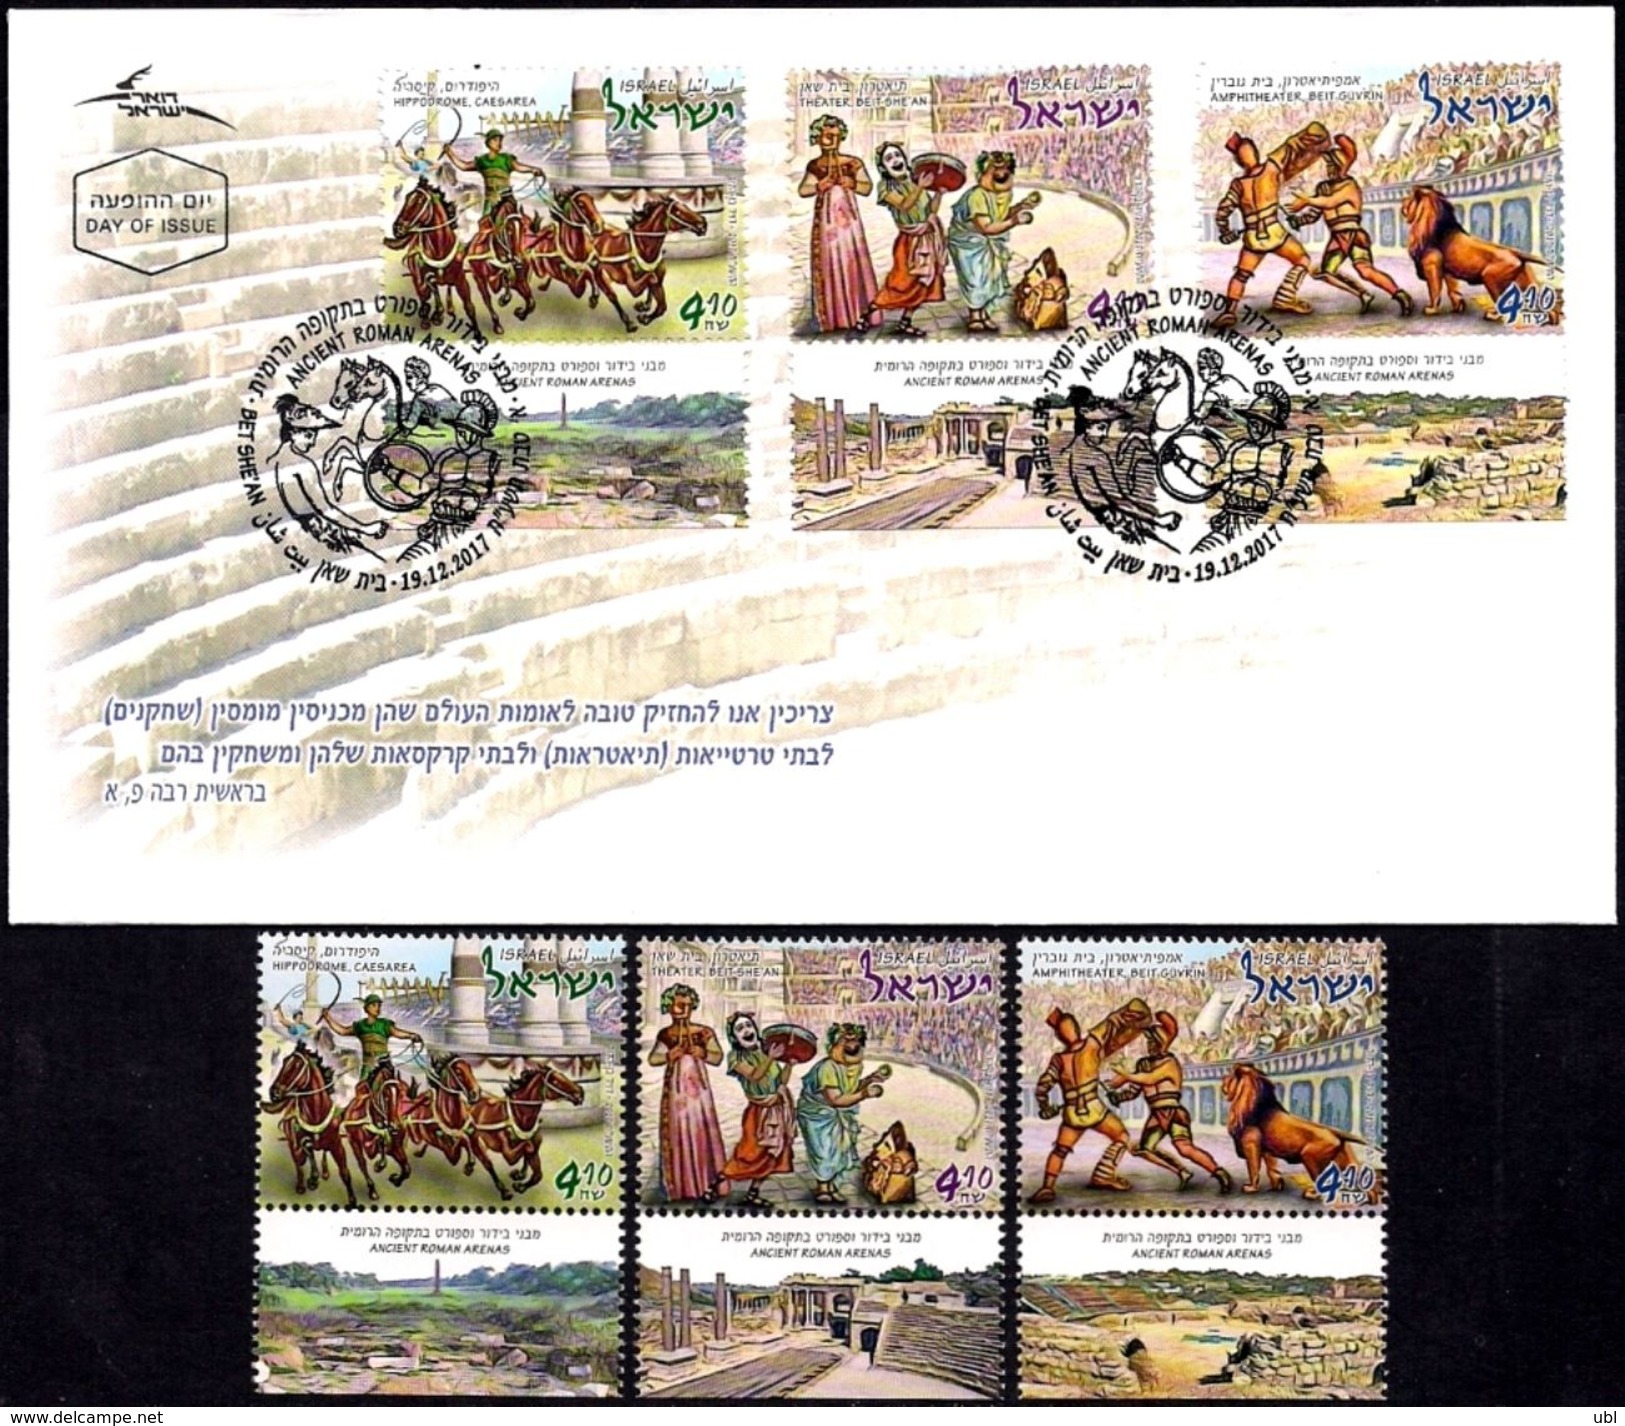 ISRAEL 2017 - Ancient Roman Arenas In Israel - A Set Of 3 Stamps With Tabs - MNH & FDC - Archaeology